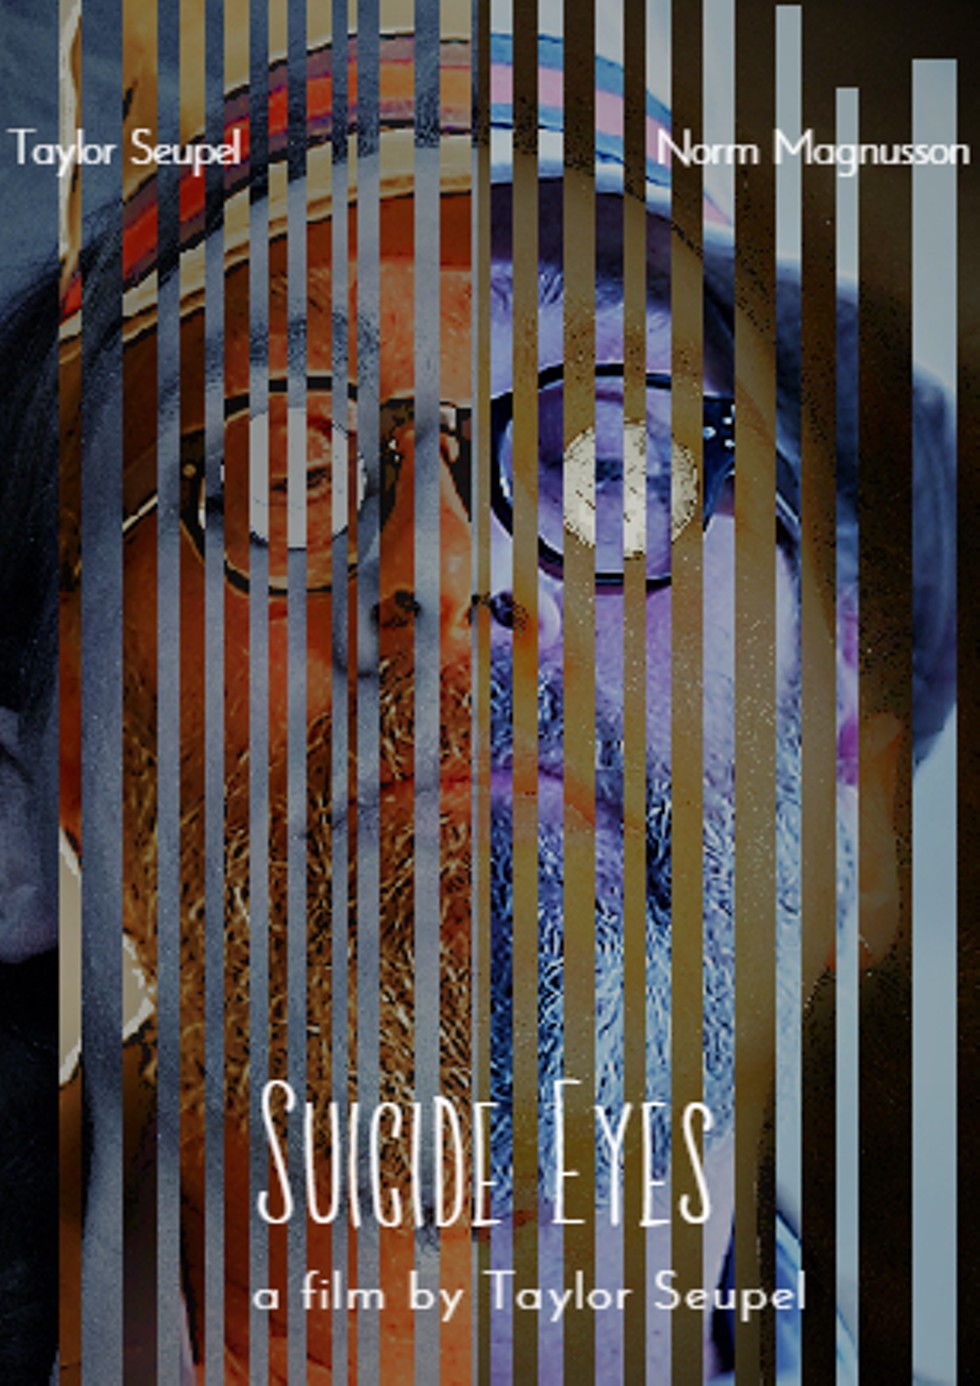 Suicide Eyes a short film by Taylor Seupel